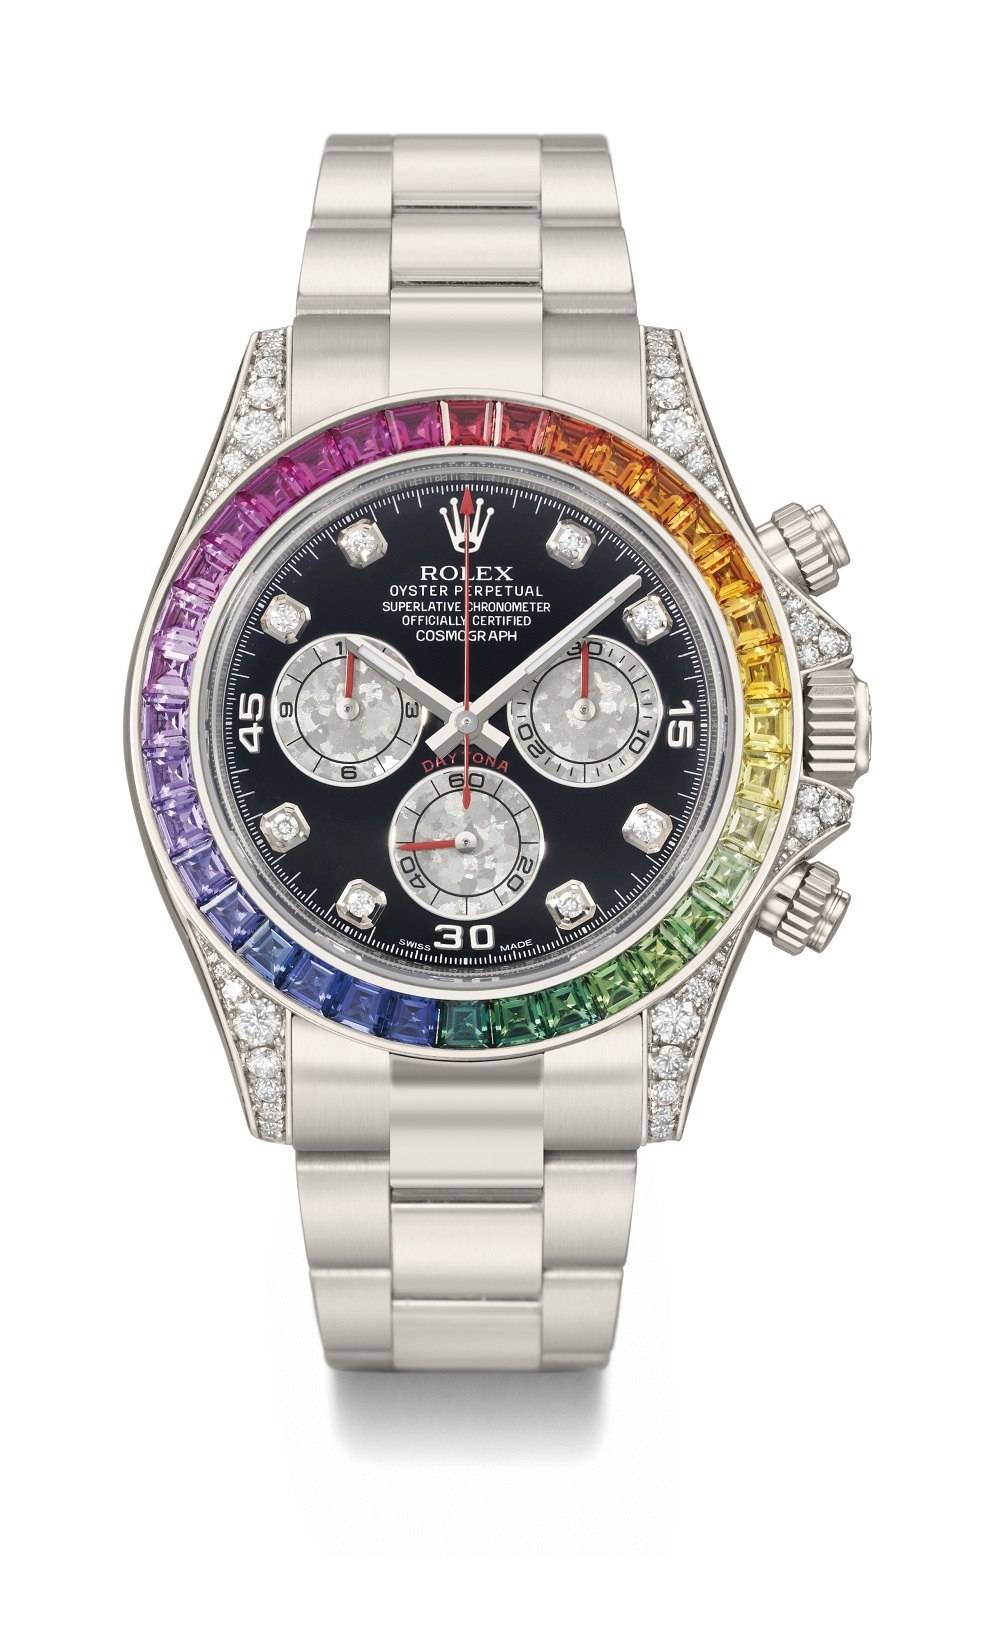 Christie’s Celebrating 50th Anniversary of Rolex Daytona With Themed Auction